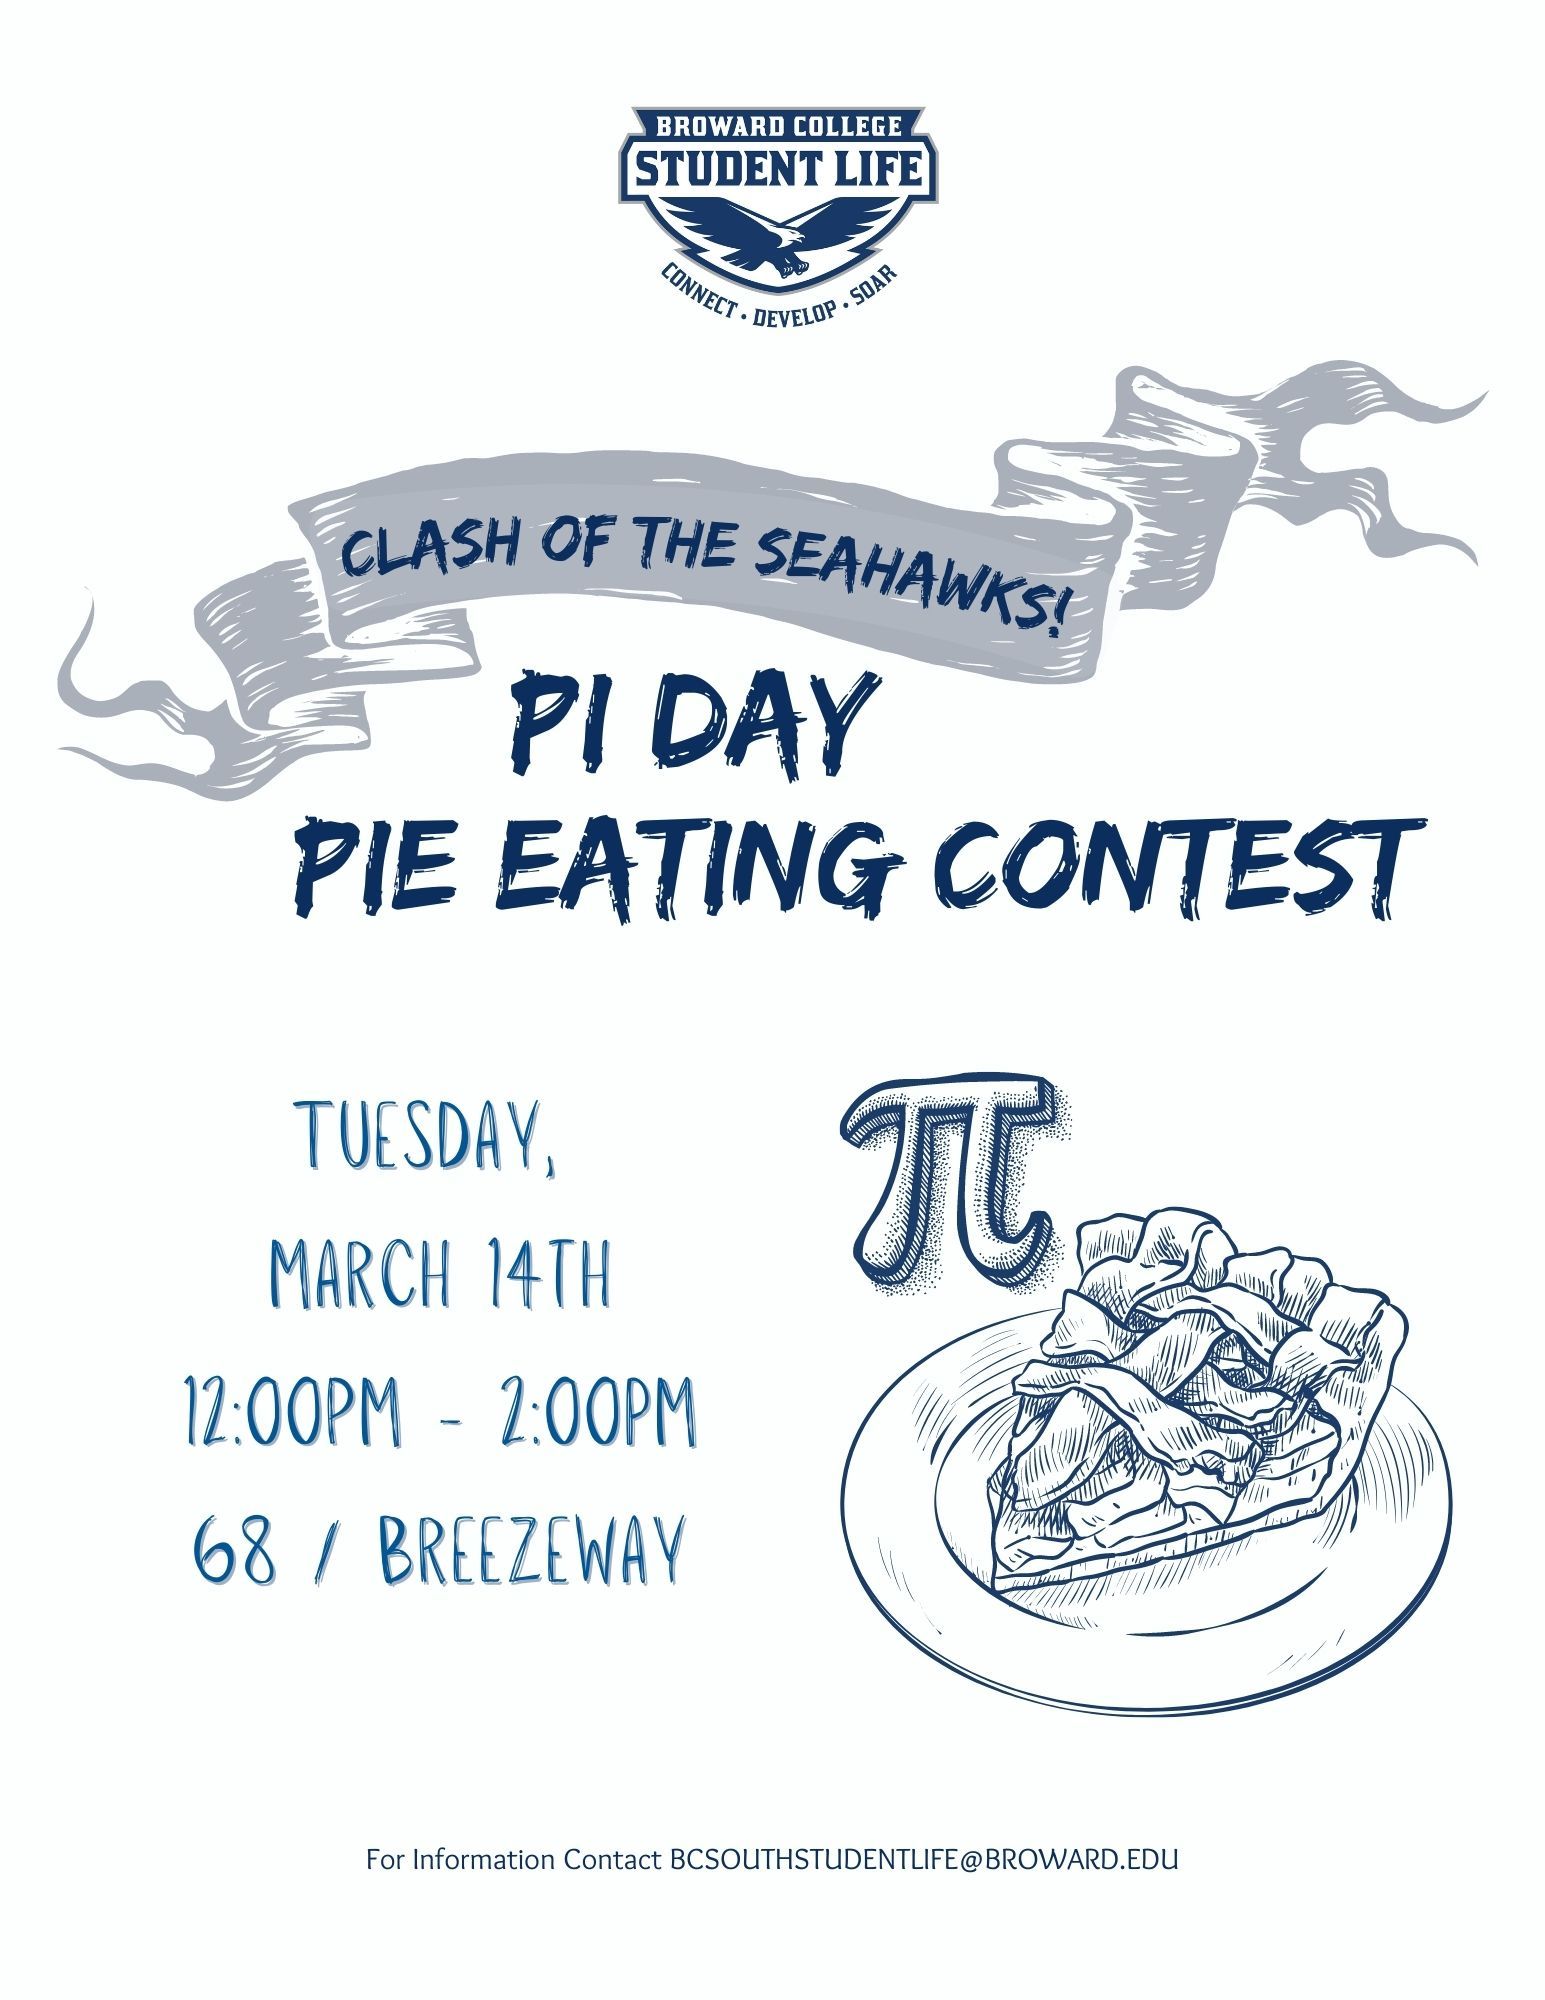 Pi Day: Pie Eating Contest